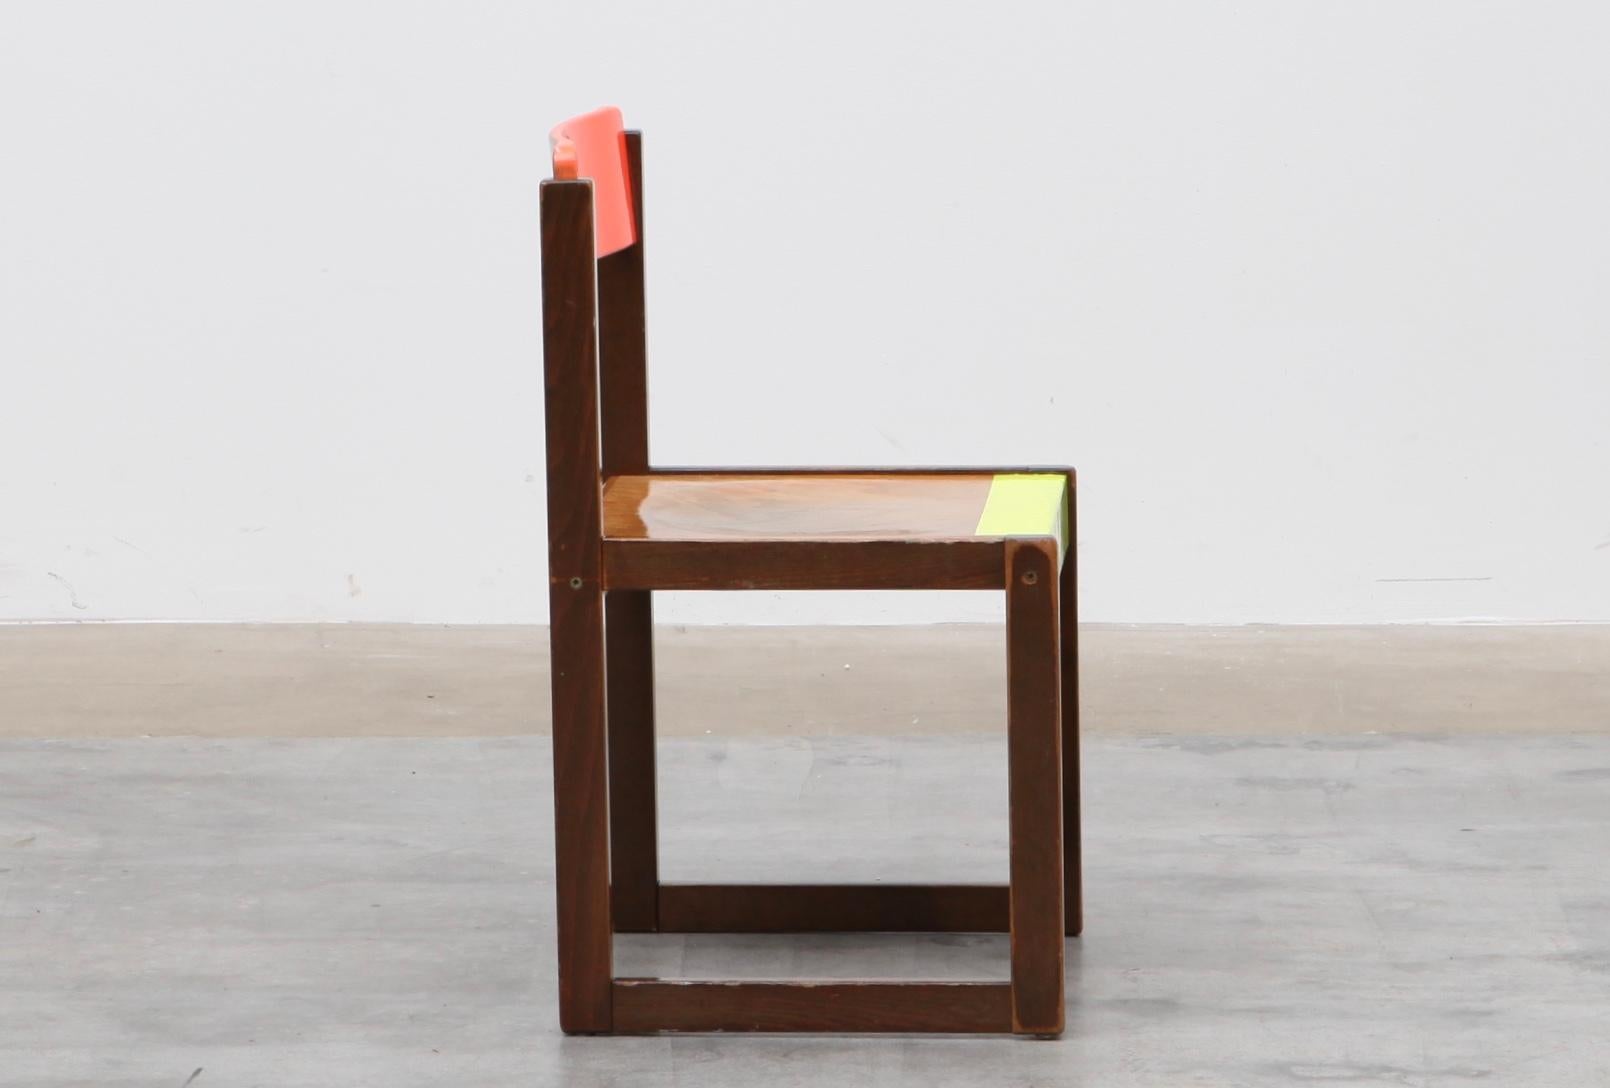 Lacquered Cube Children's Chair by Markus Friedrich Staab, 2011 For Sale